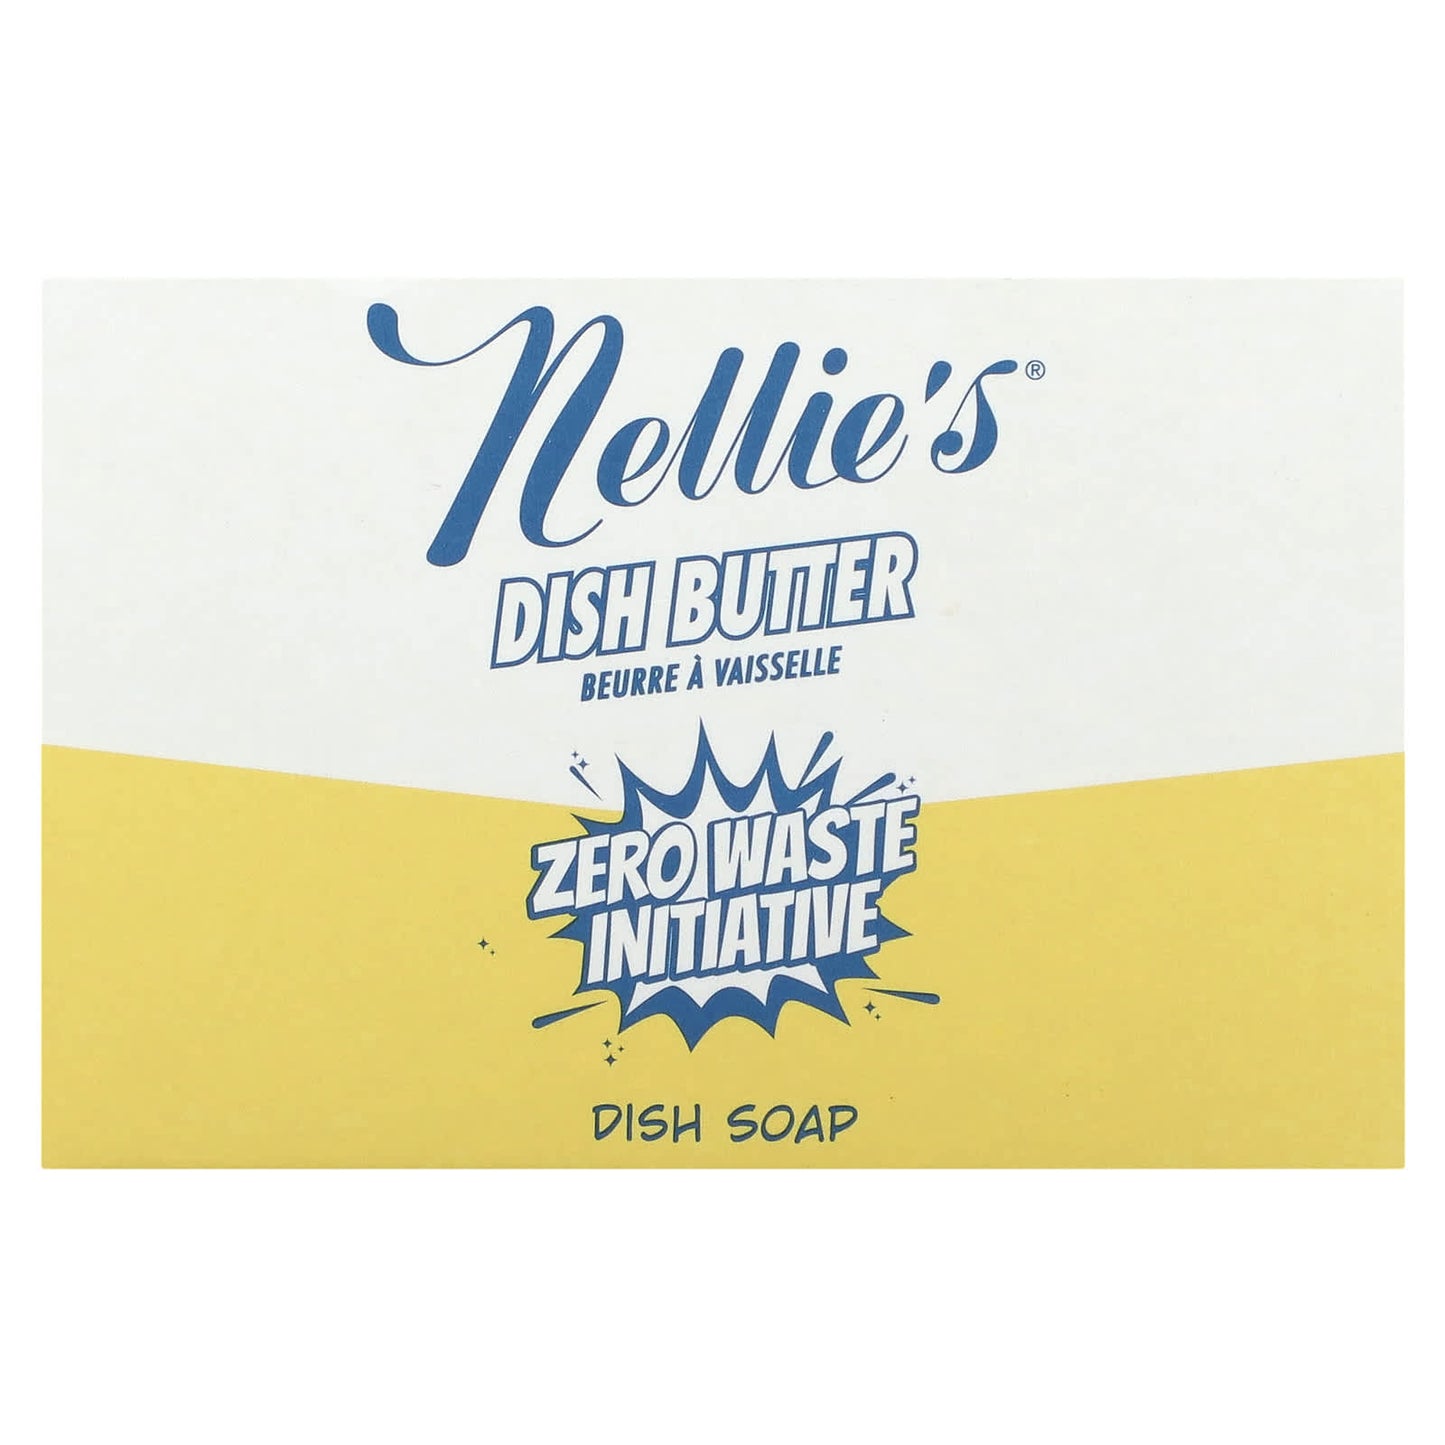 Nellie's-Dish Soap Refill-Dish Butter-1 Bar